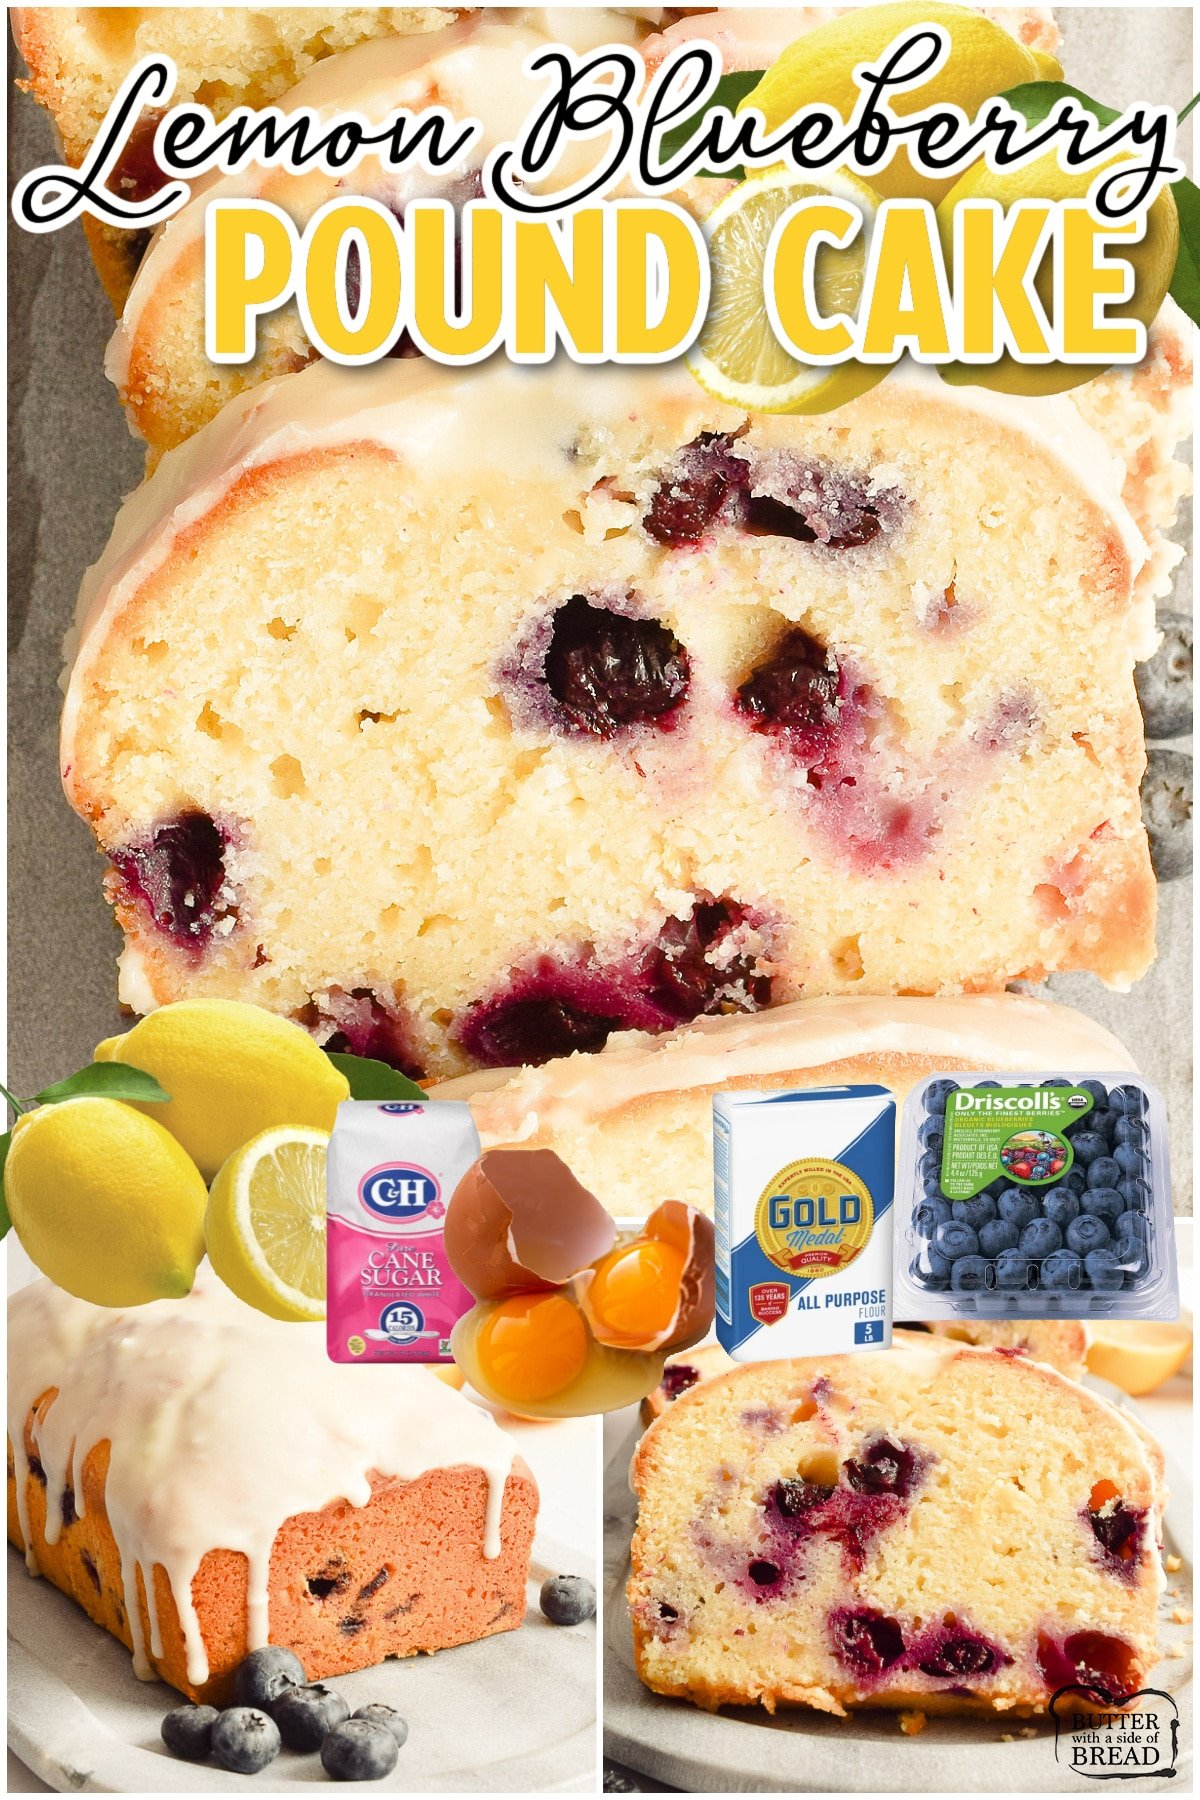 Lemon Blueberry Pound Cake is a delicious dessert packed with so much great taste and fresh berries in every slice. This Lemon Pound Cake recipe is the perfect treat for Spring snacking!